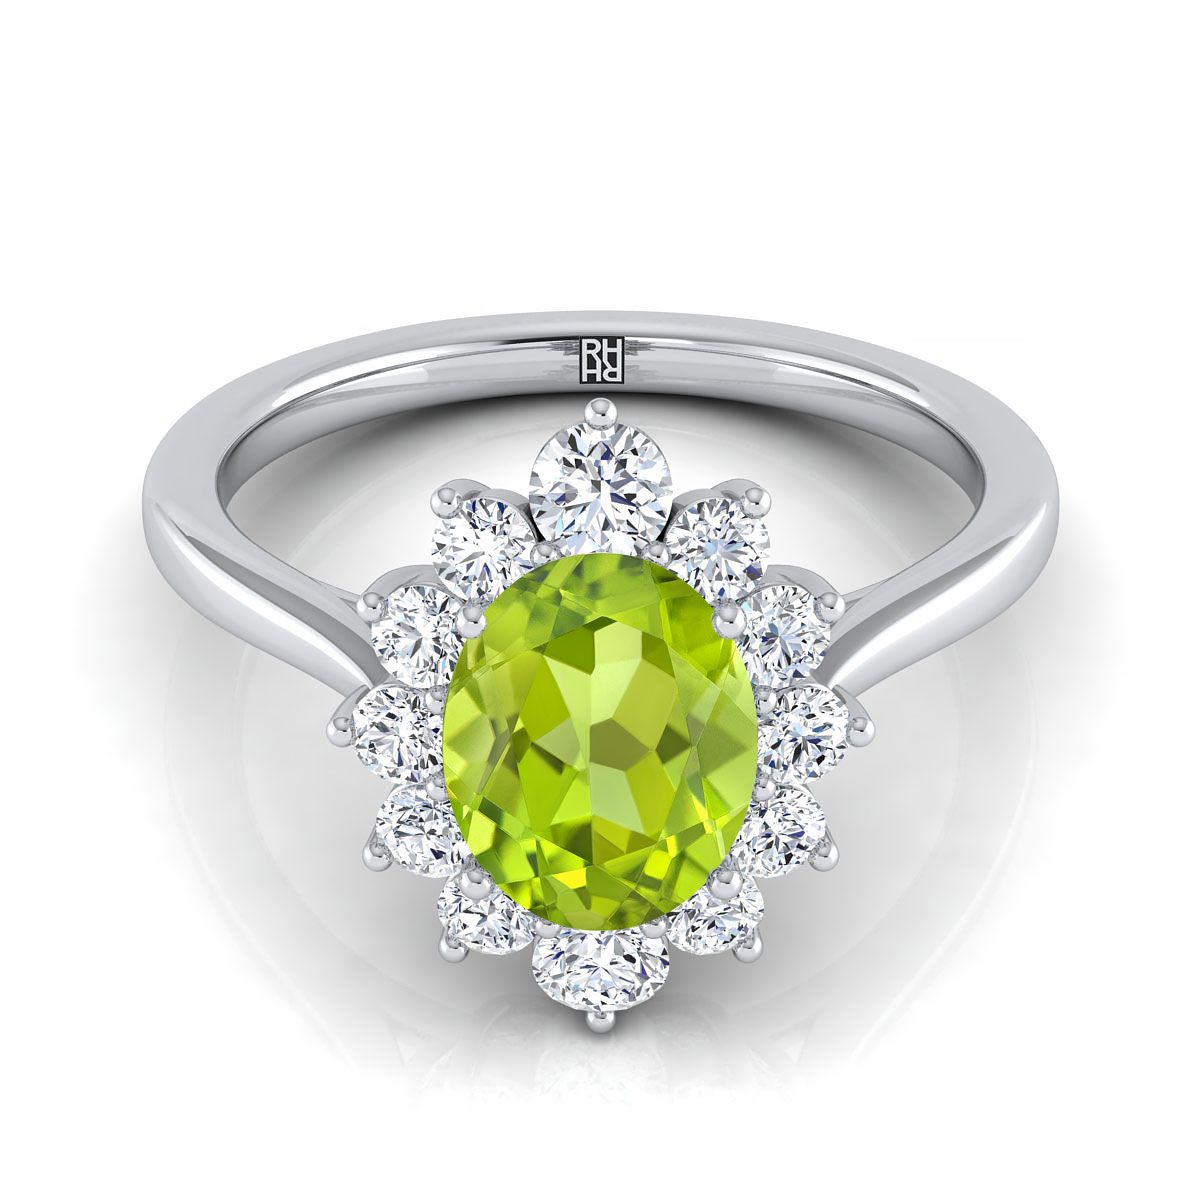 18K White Gold Oval Peridot Floral Diamond Halo Engagement Ring -1/2ctw